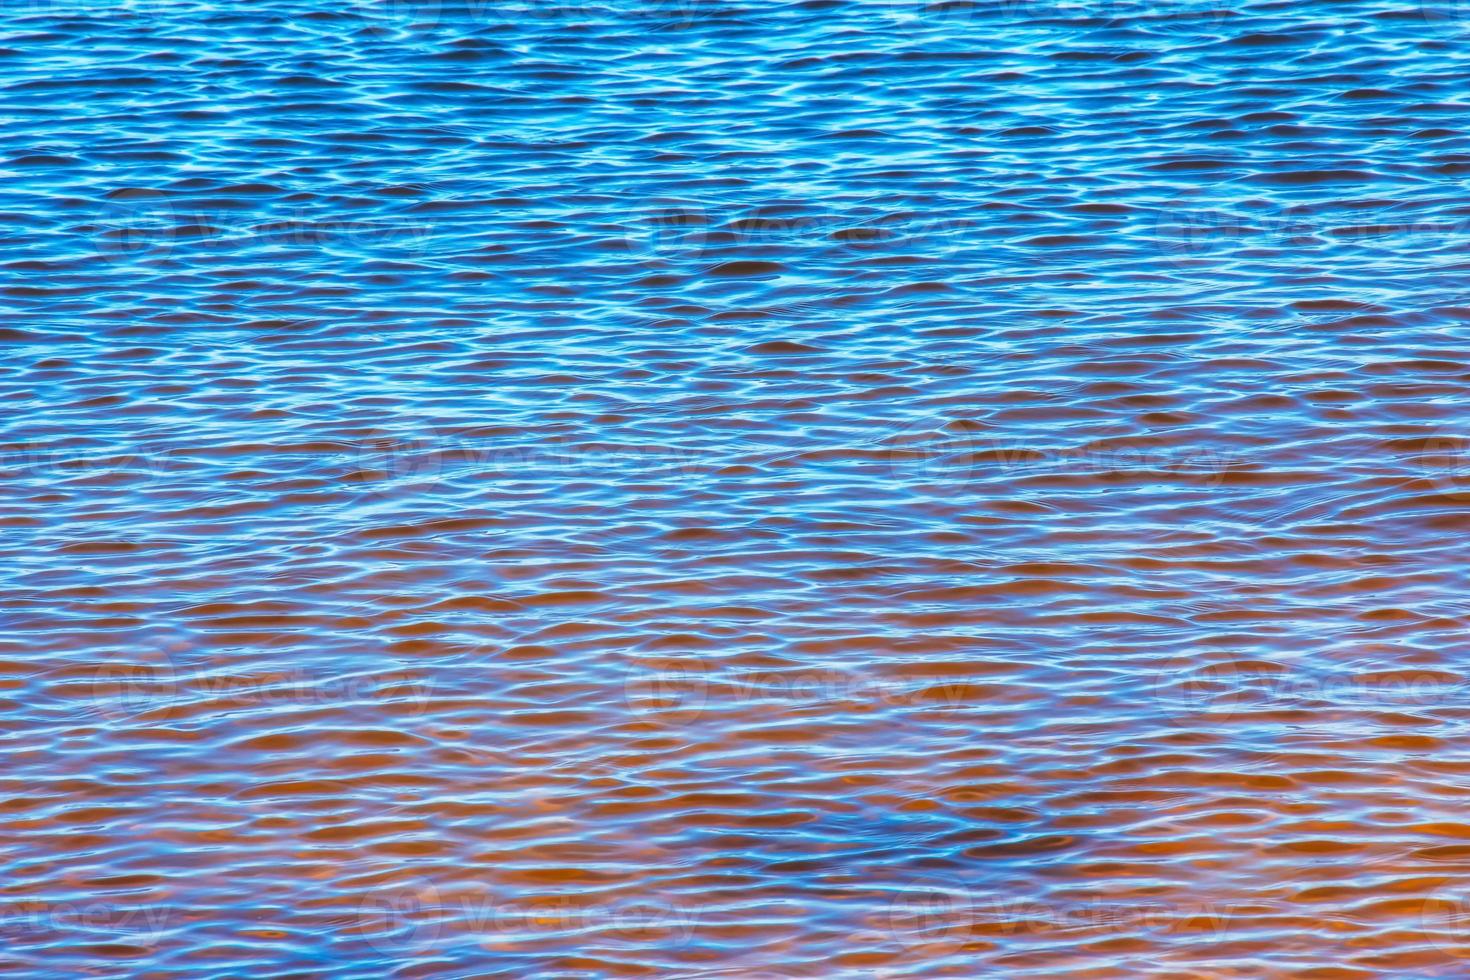 Water ripple texture background. Wavy water surface during sunset, golden light reflecting in the water. photo